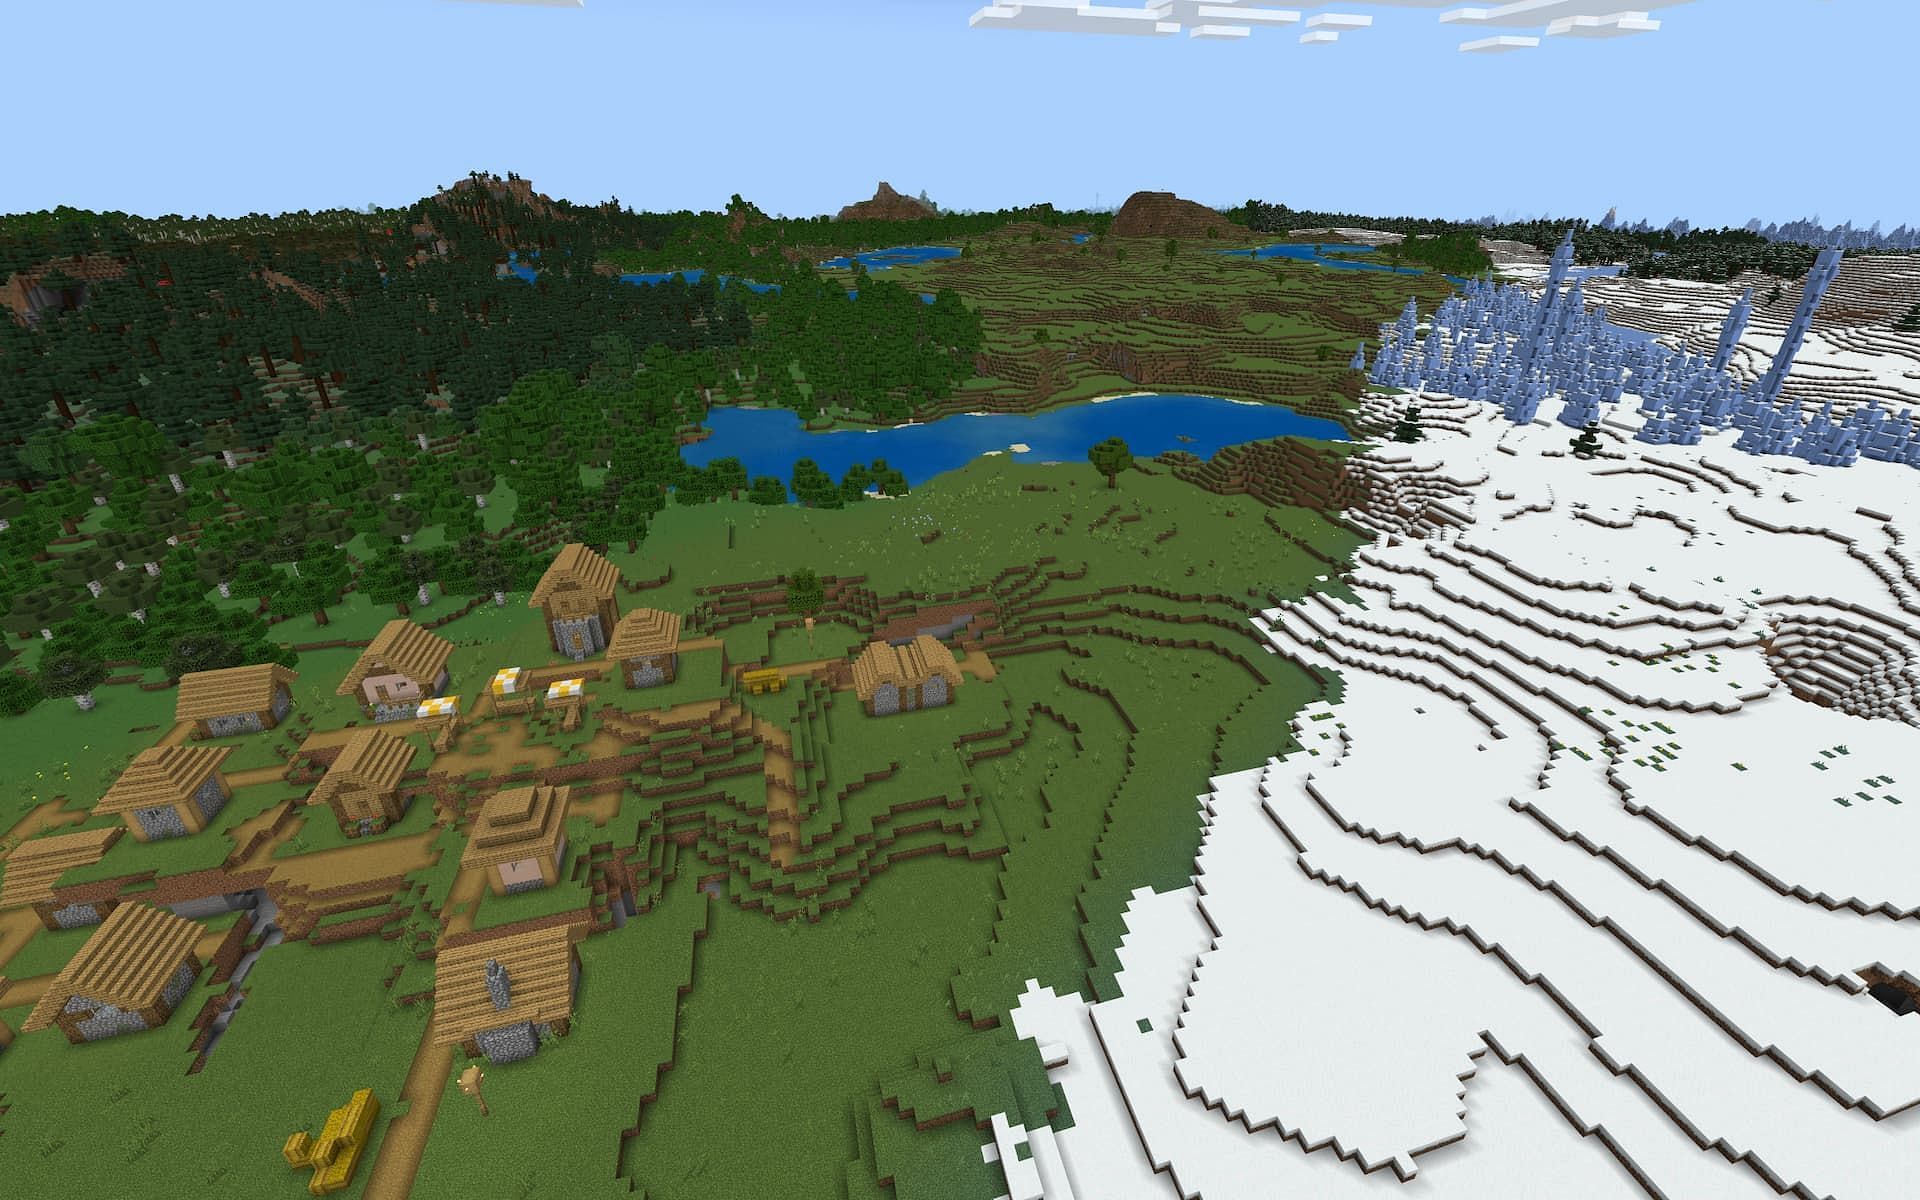 Seek shelter from the snowstorm in this Minecraft village (Image via Mojang)